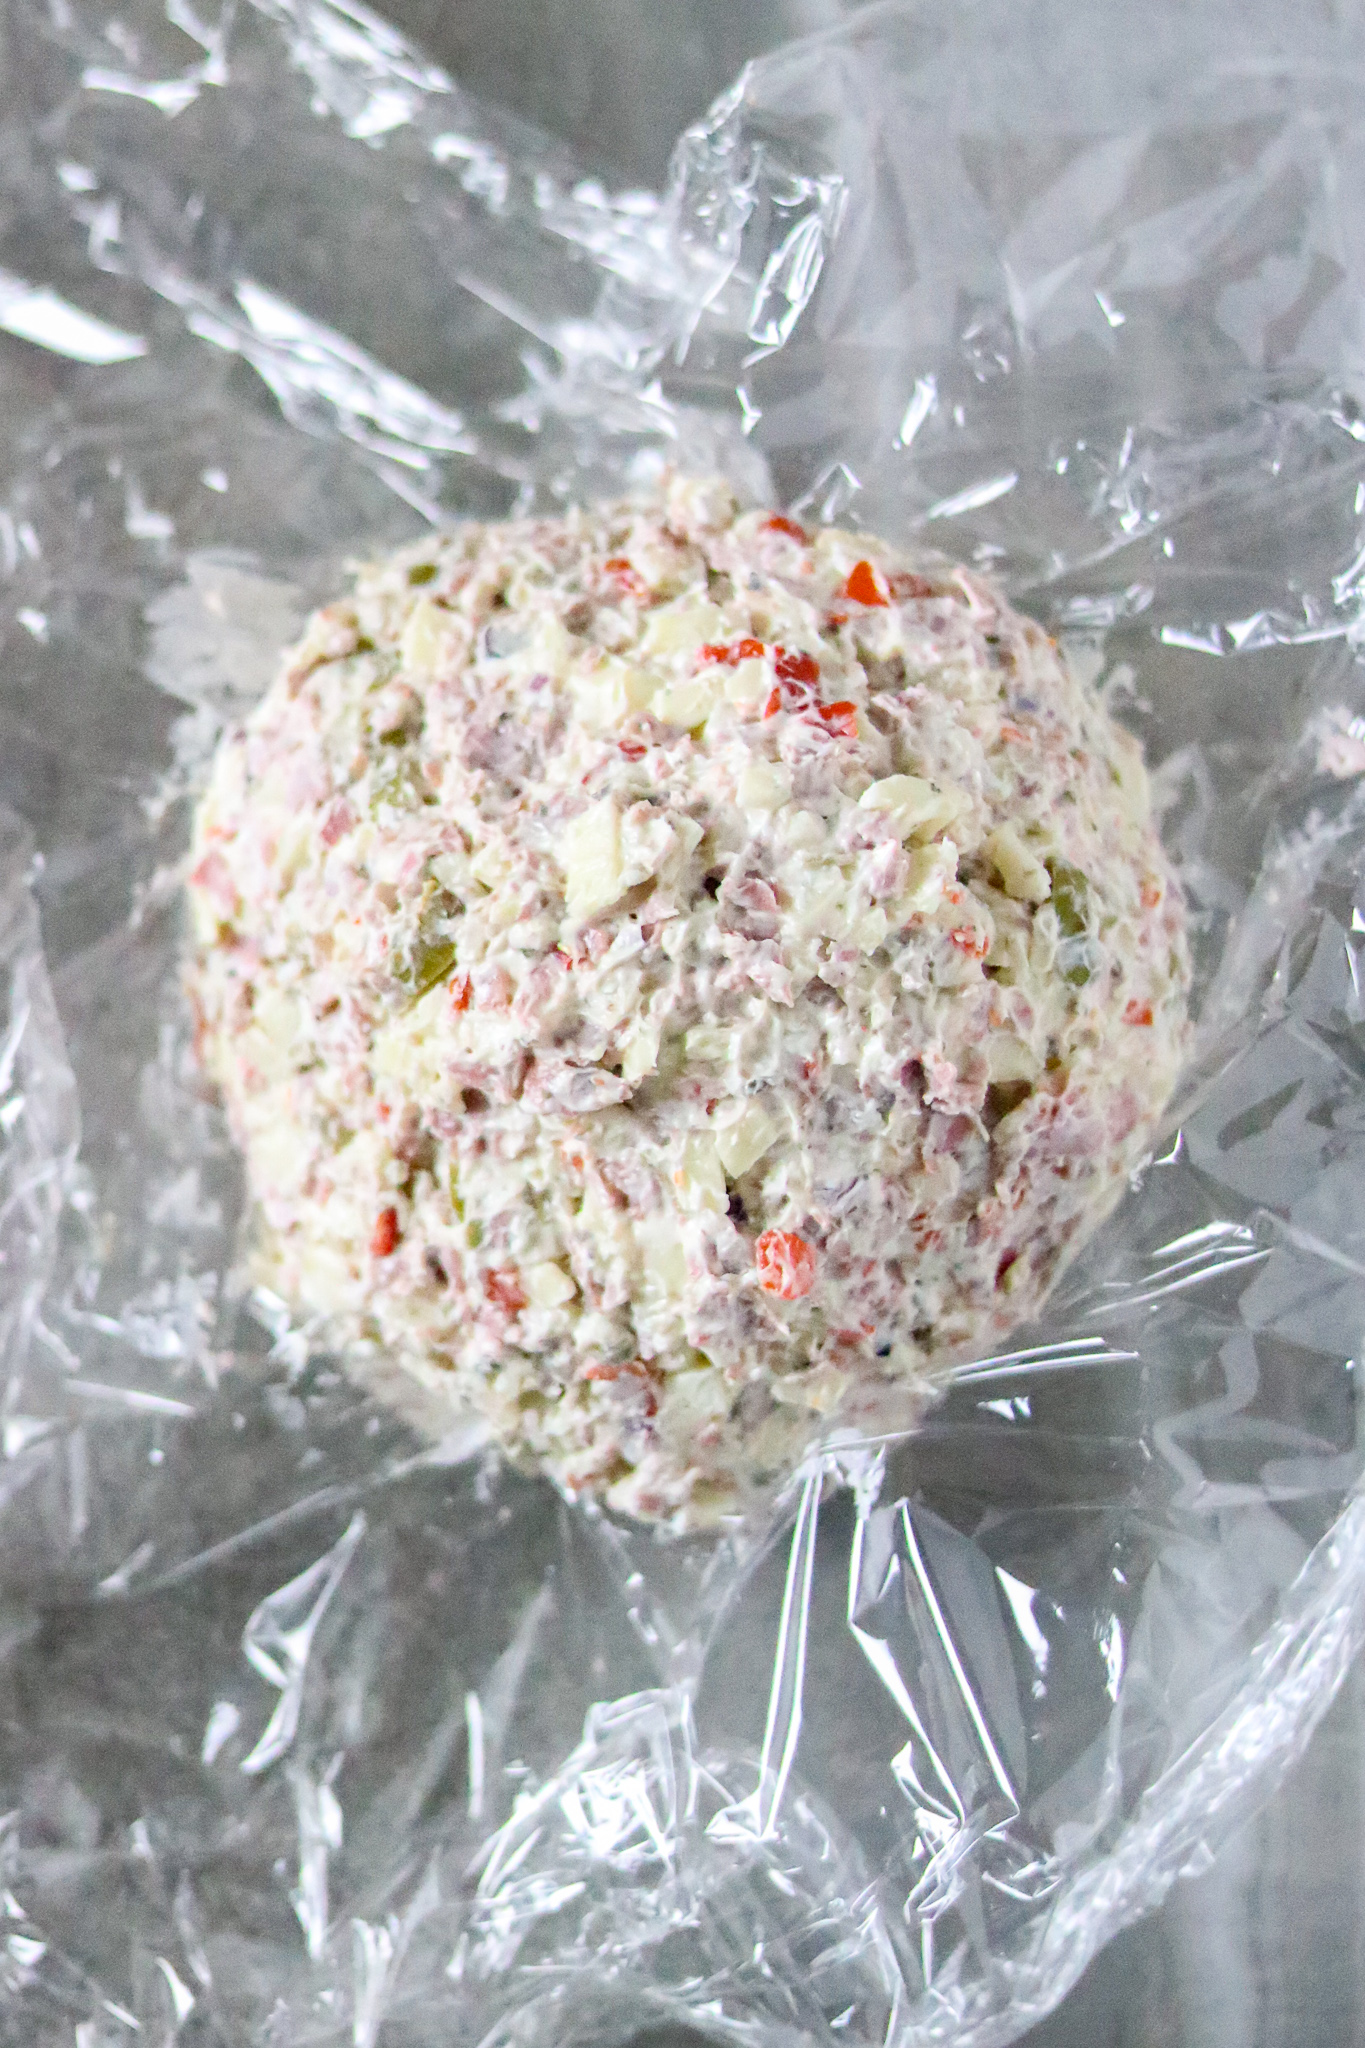 A cheese ball on a piece of plastic wrap.